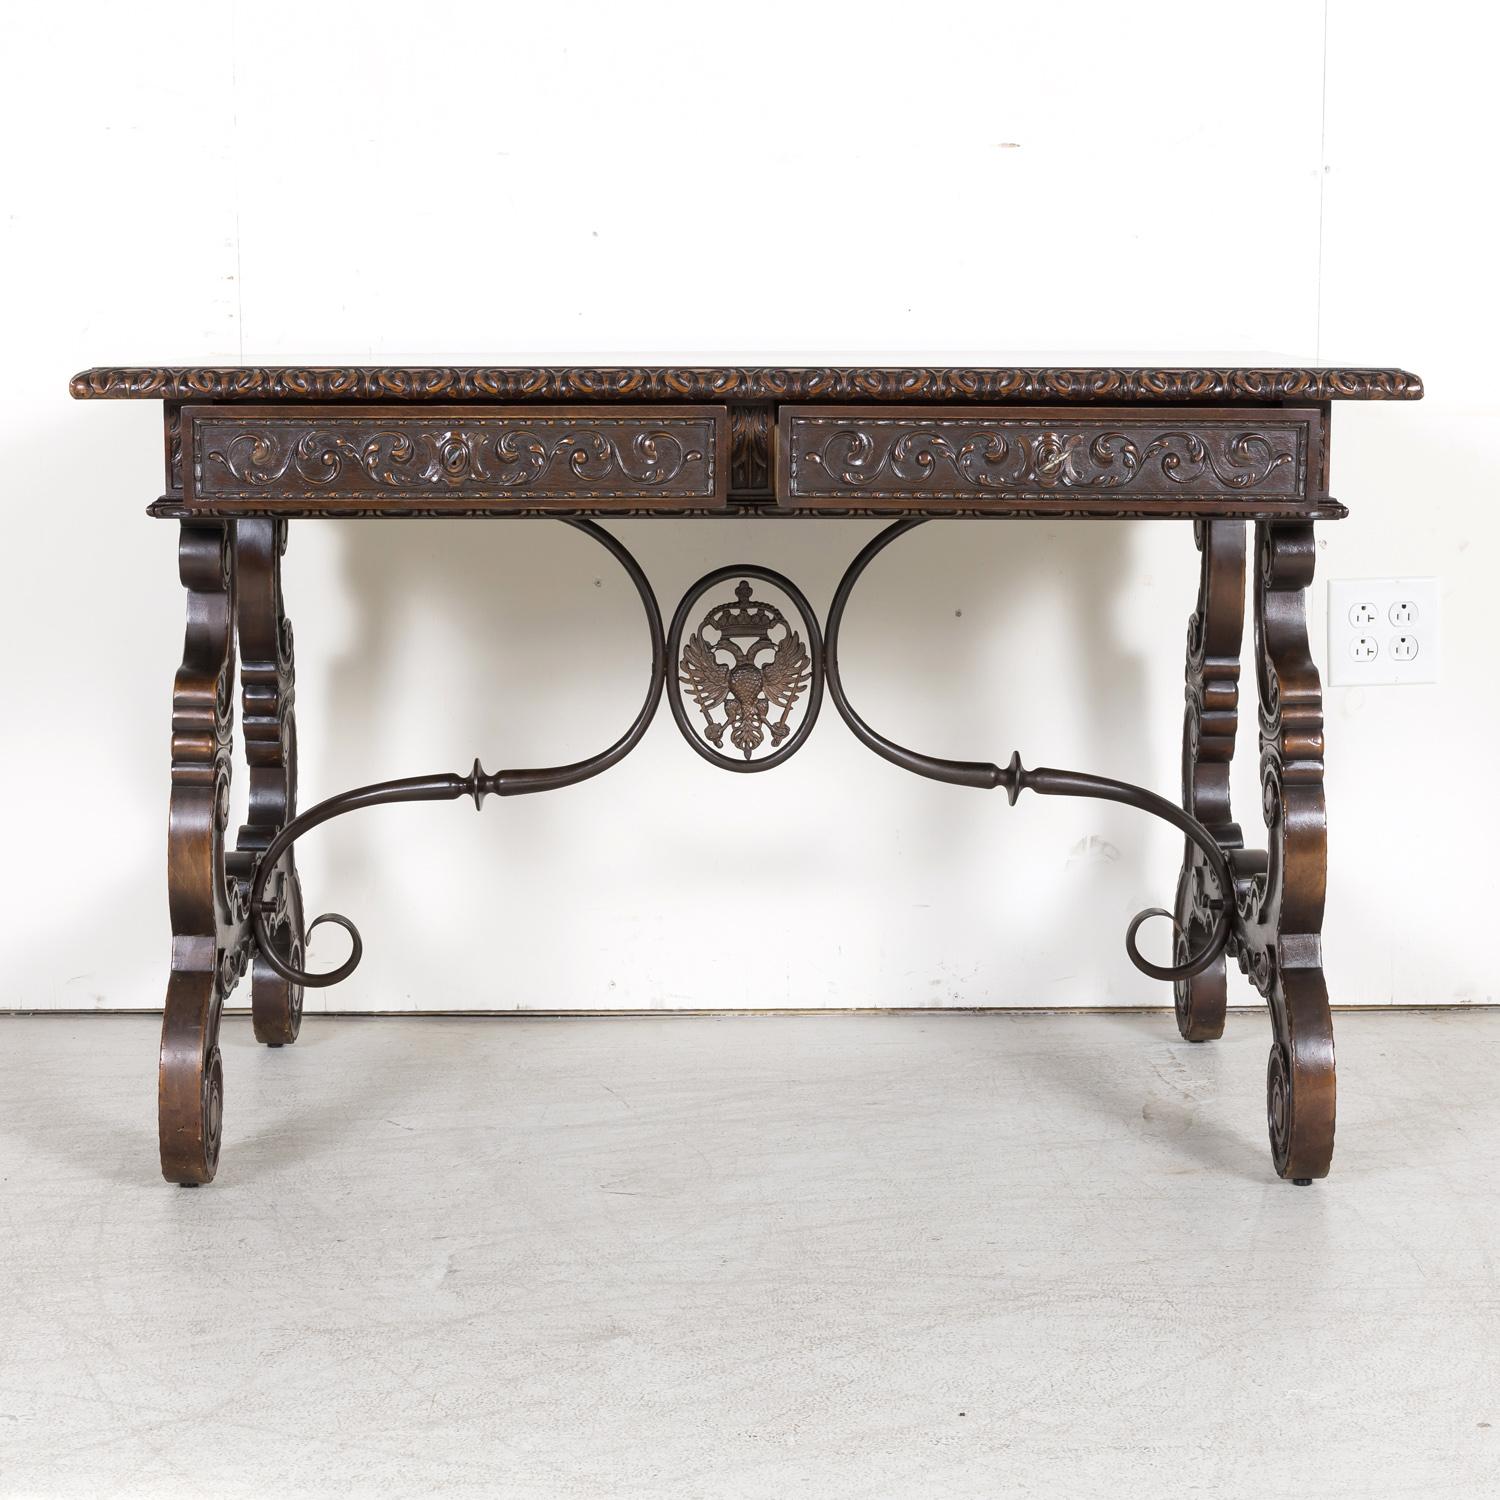 Wrought Iron 19th Century Spanish Baroque Style Walnut Lyre Leg Writing Table or Side Table For Sale